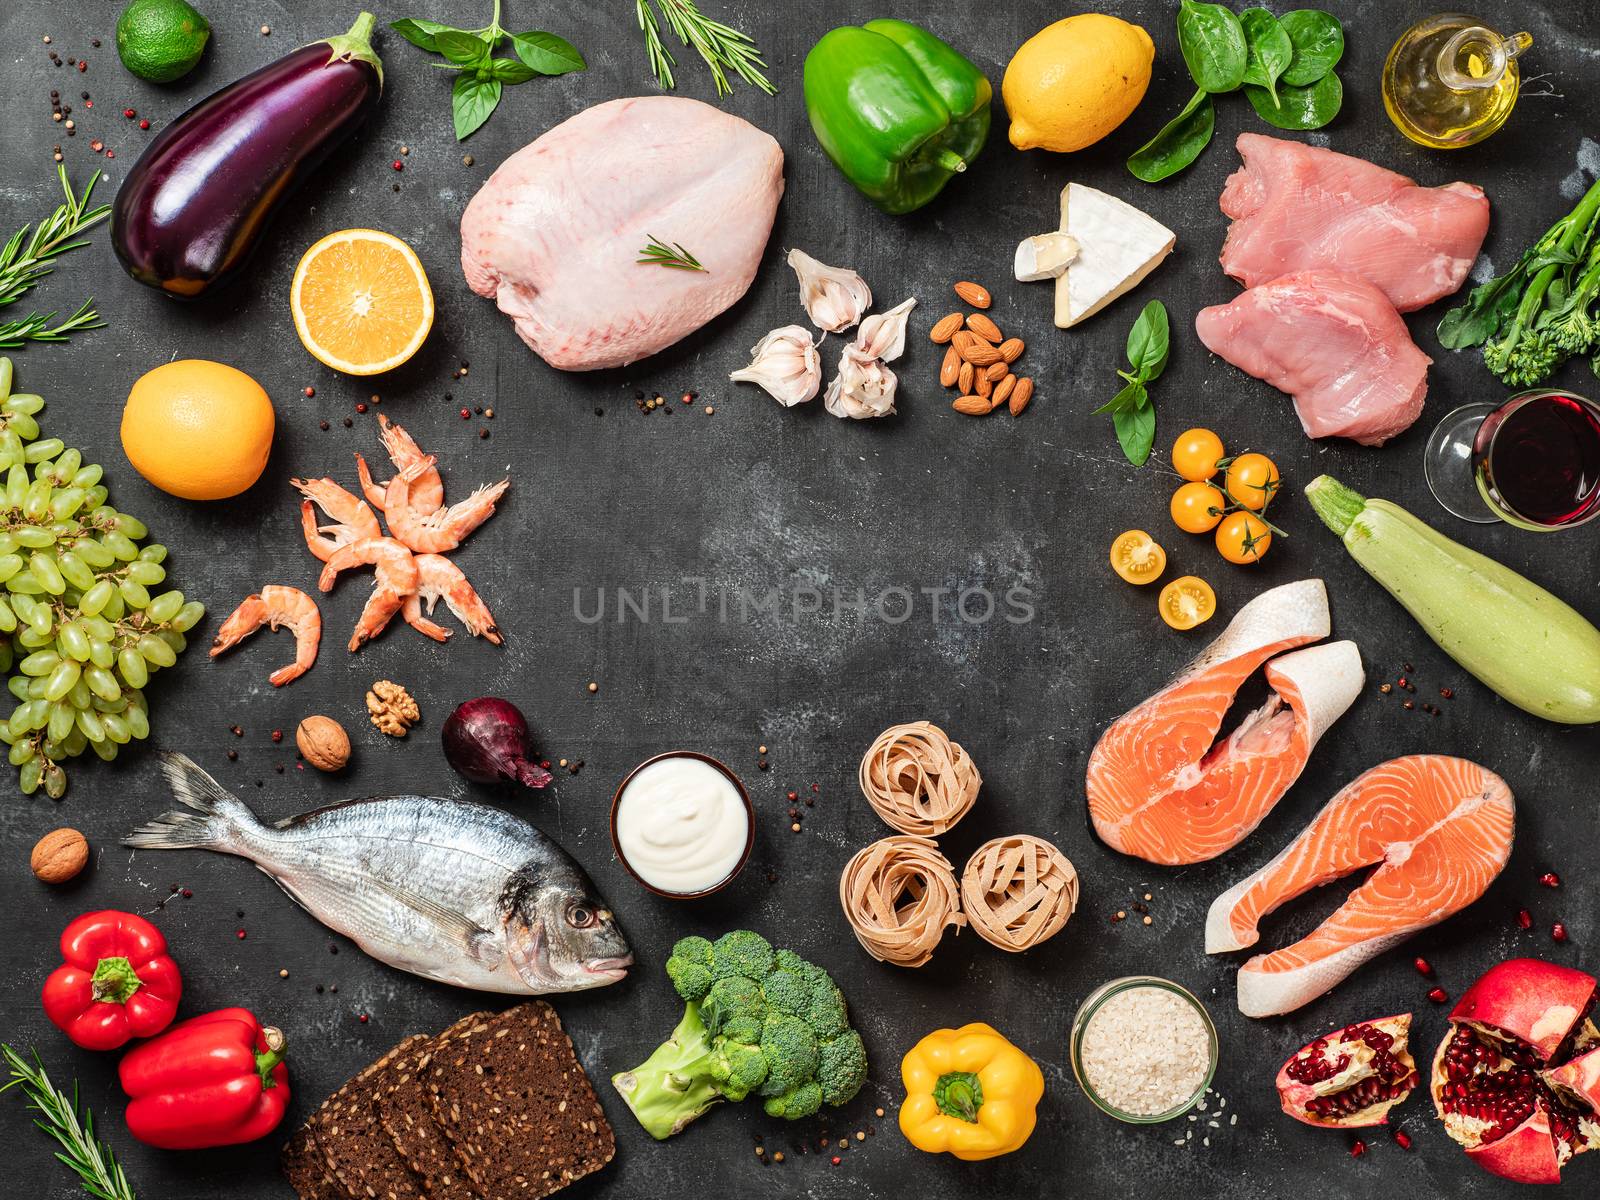 Mediterranean diet concept with copy space in center. Top view of selective food ingredients of Mediterranean Diet on dark background. Flat lay.